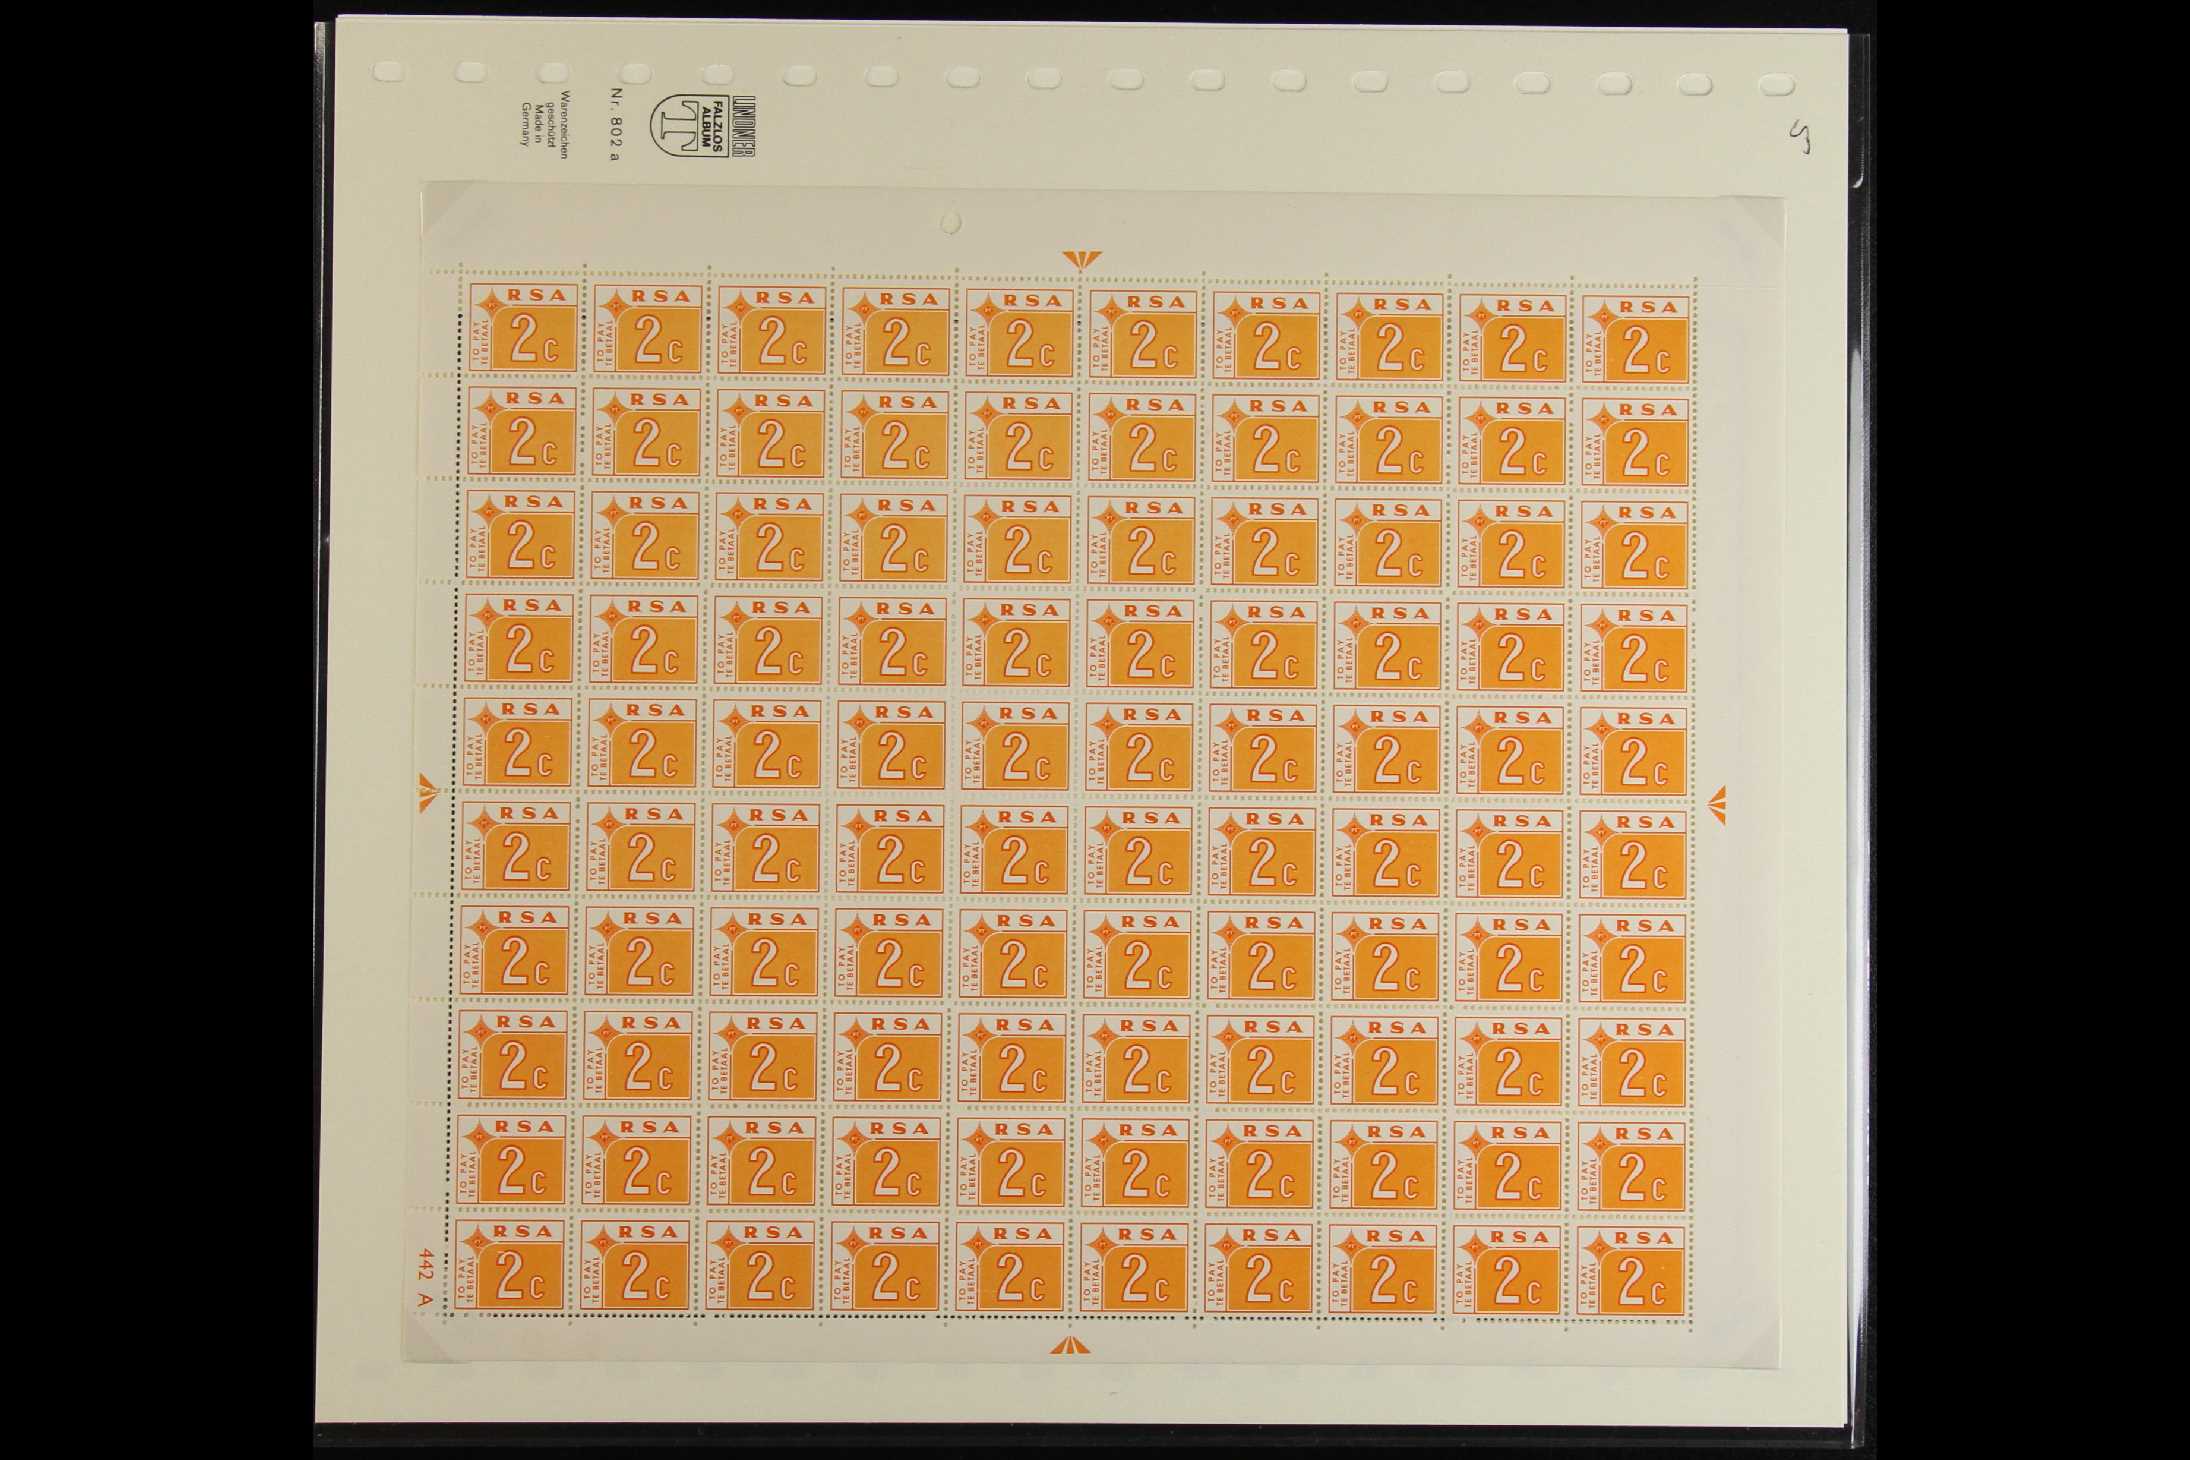 SOUTH AFRICA POSTAGE DUES 1972 complete set, SG D75/80, complete sheet 100 never hinged mint, - Image 2 of 7